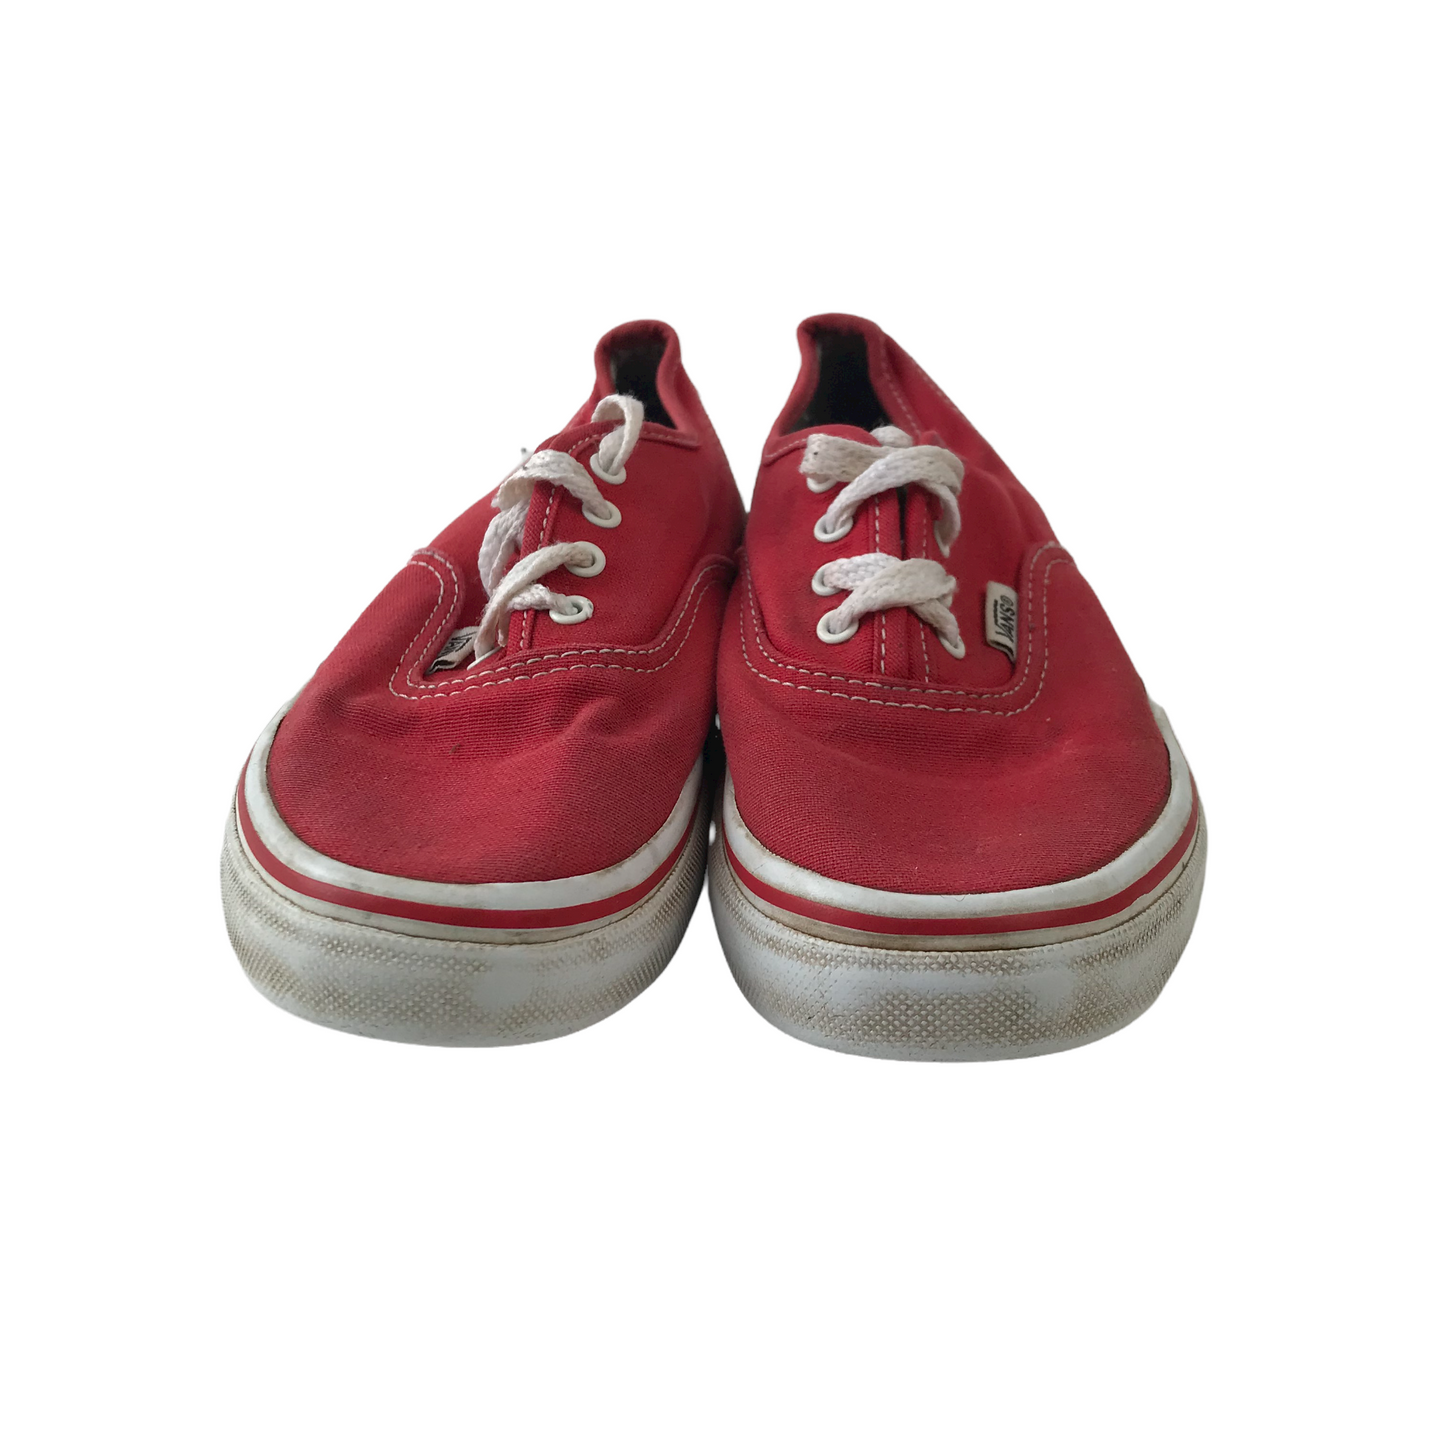 Vans Red Canvas Trainers Shoe Size 1